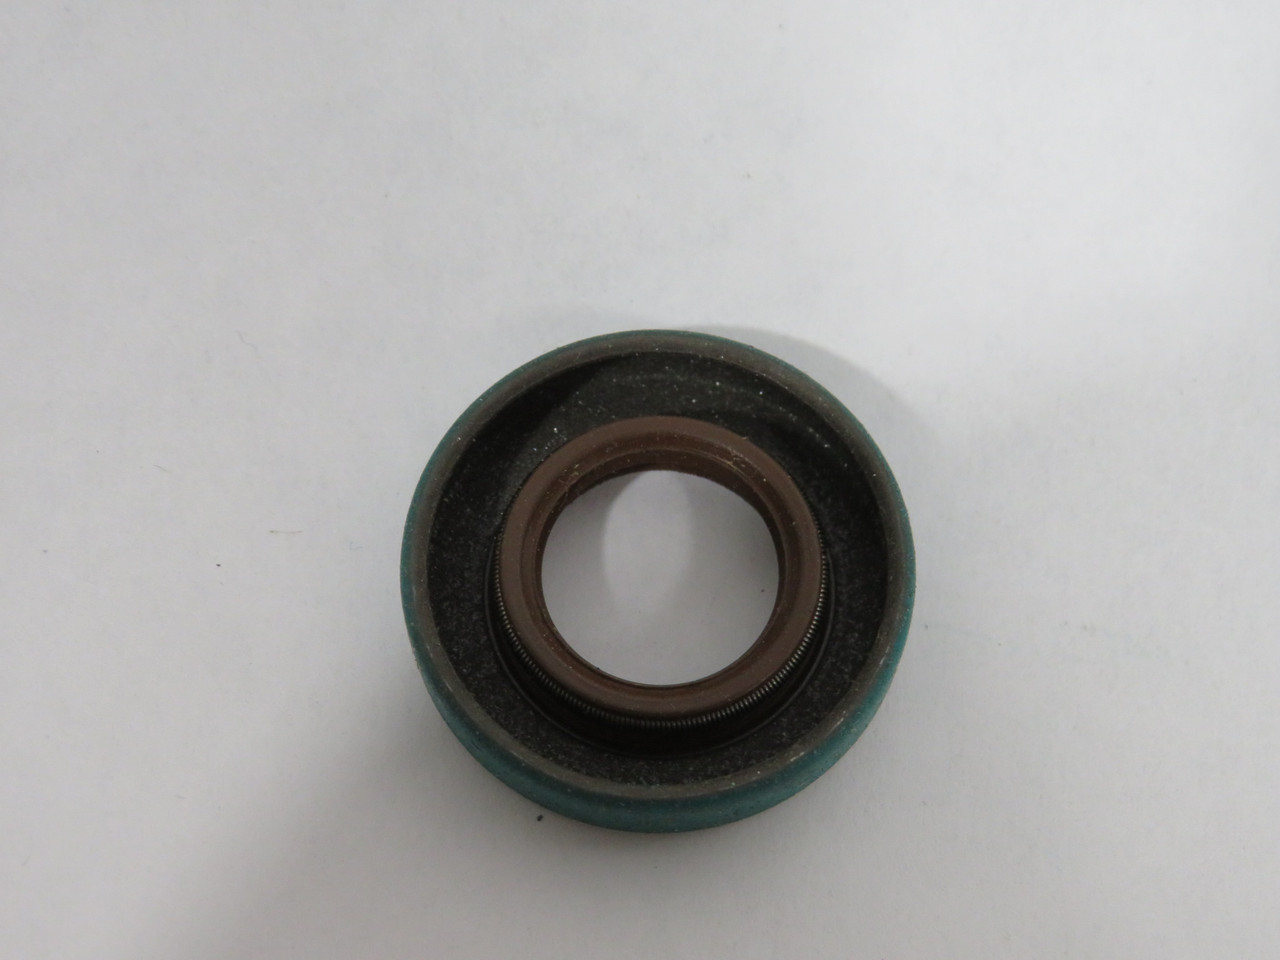 Chicago Rawhide 6248 Oil Seal 1.181"OD 0.625" Shaft Dia. 0.256"W NEW